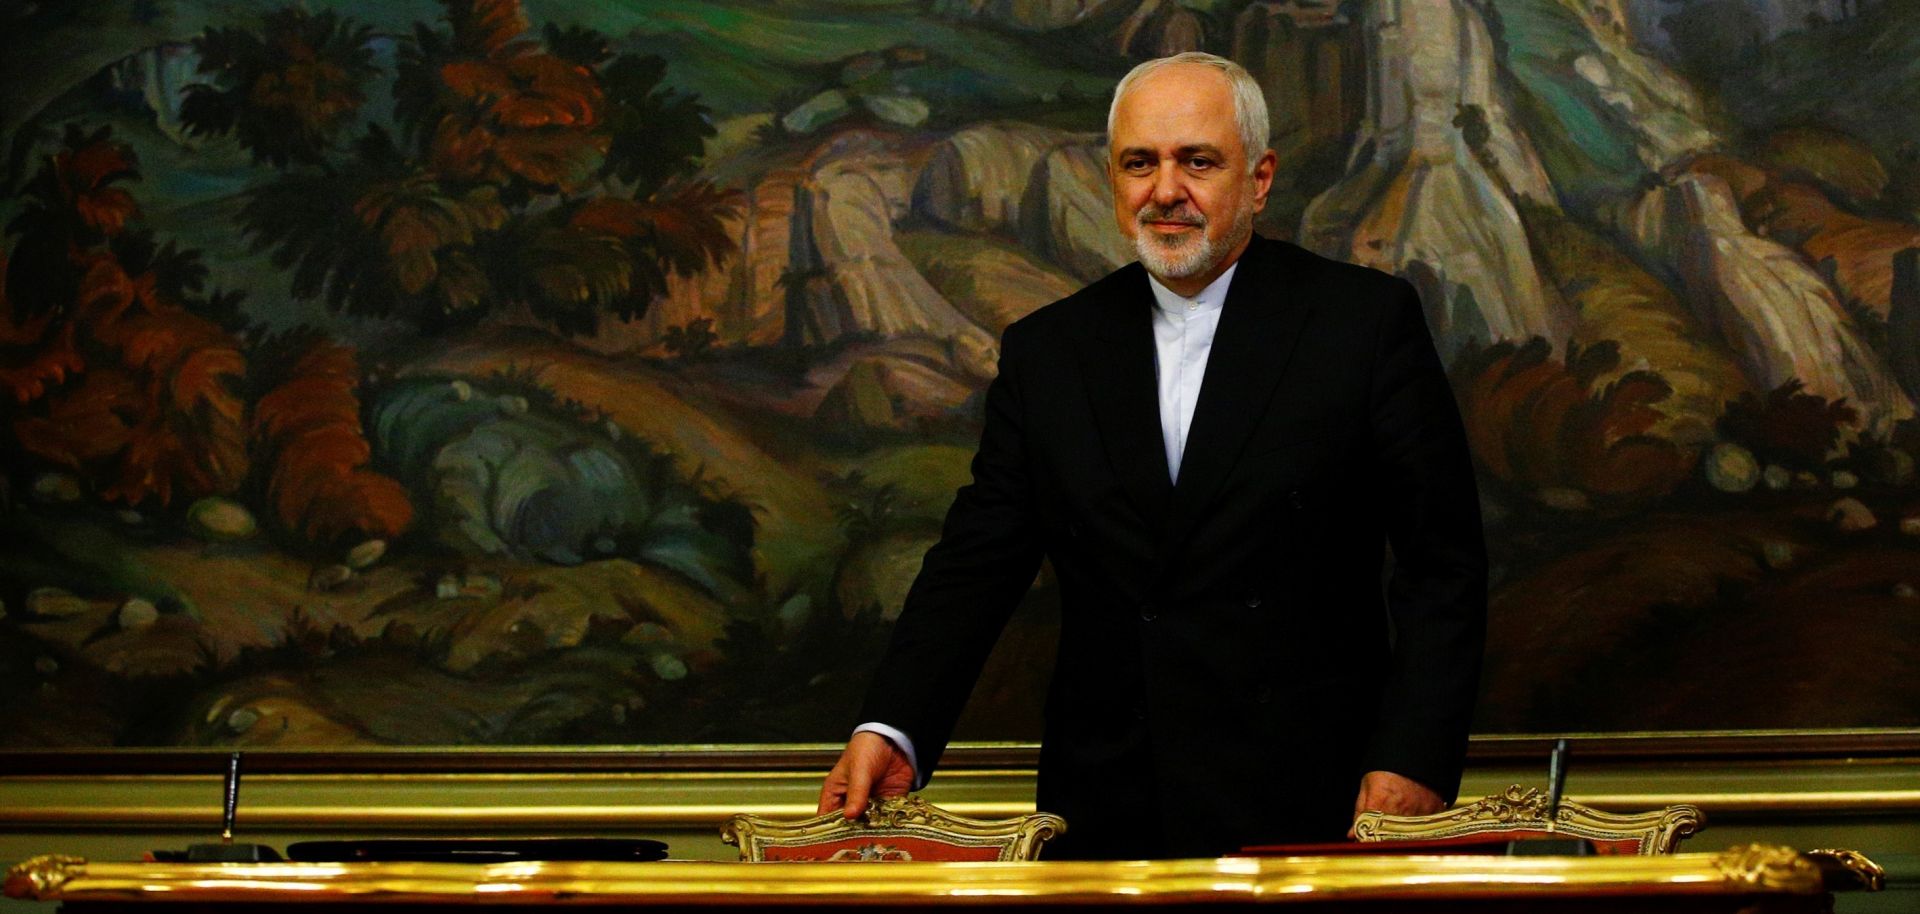 Entities and people appointed by Iranian Supreme Leader Ayatollah Ali Khamenei, including Foreign Minister Javad Zarif, pictured here, could run afoul of a new round of U.S. sanctions.